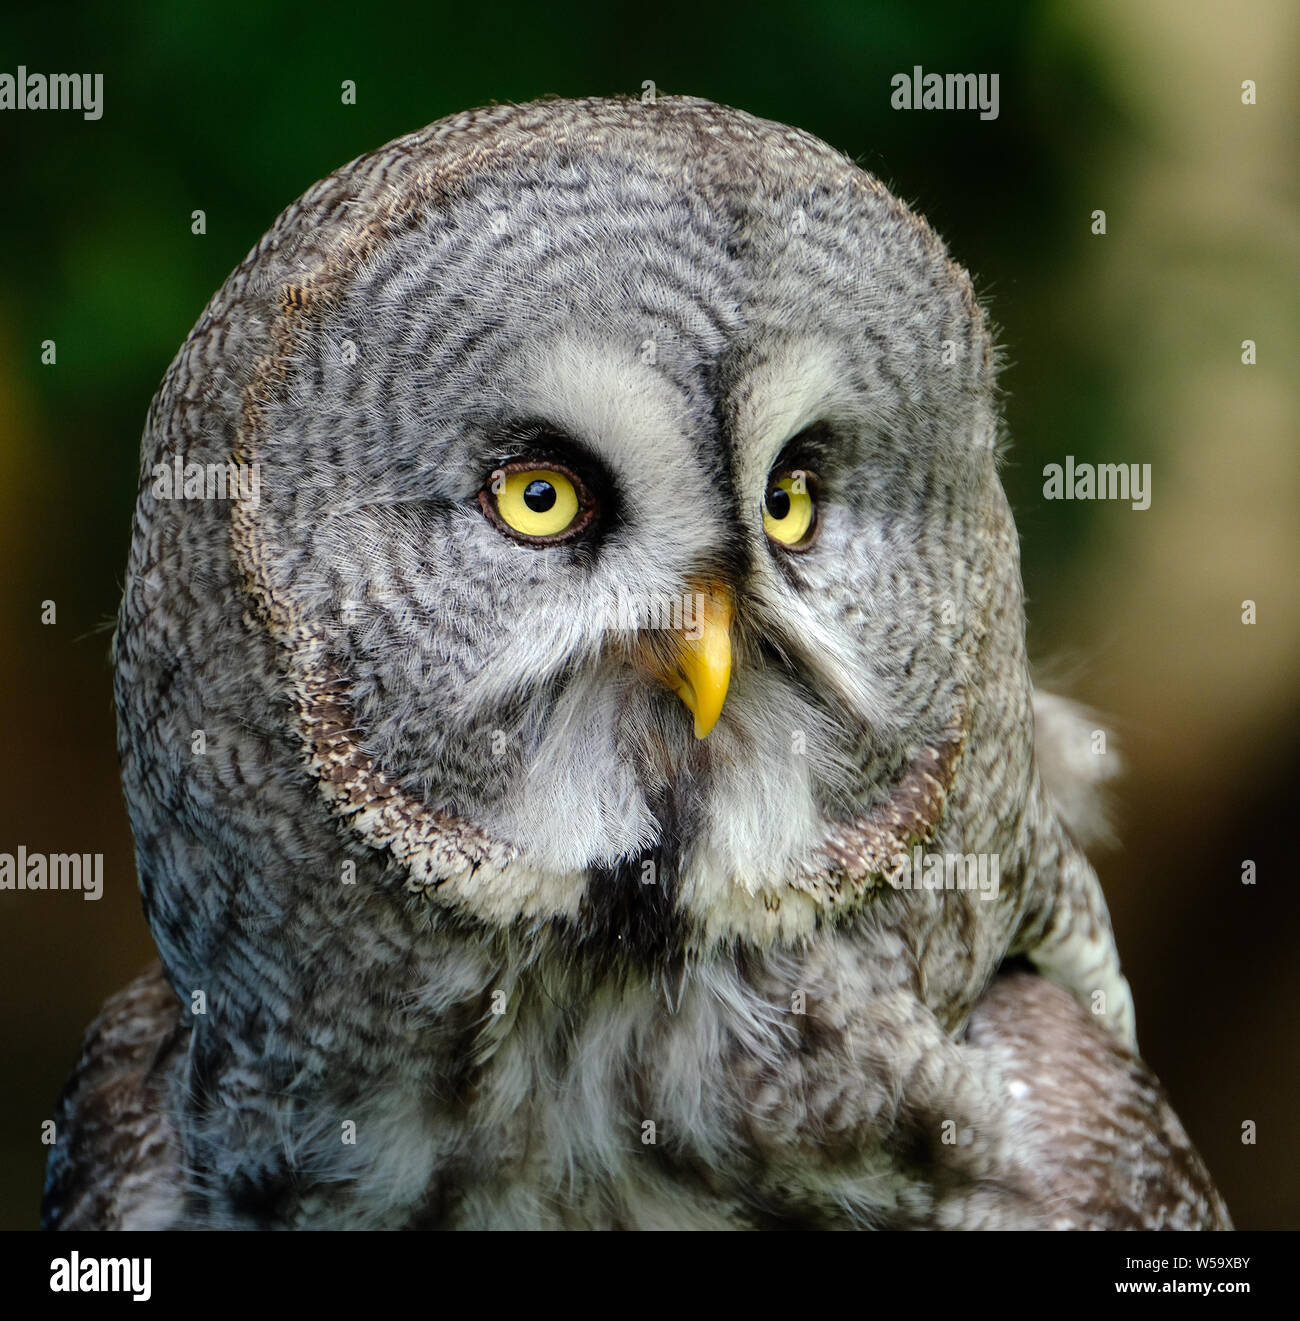 The great grey owl  is a very large owl, documented as the world's largest species of owl by length. Stock Photo